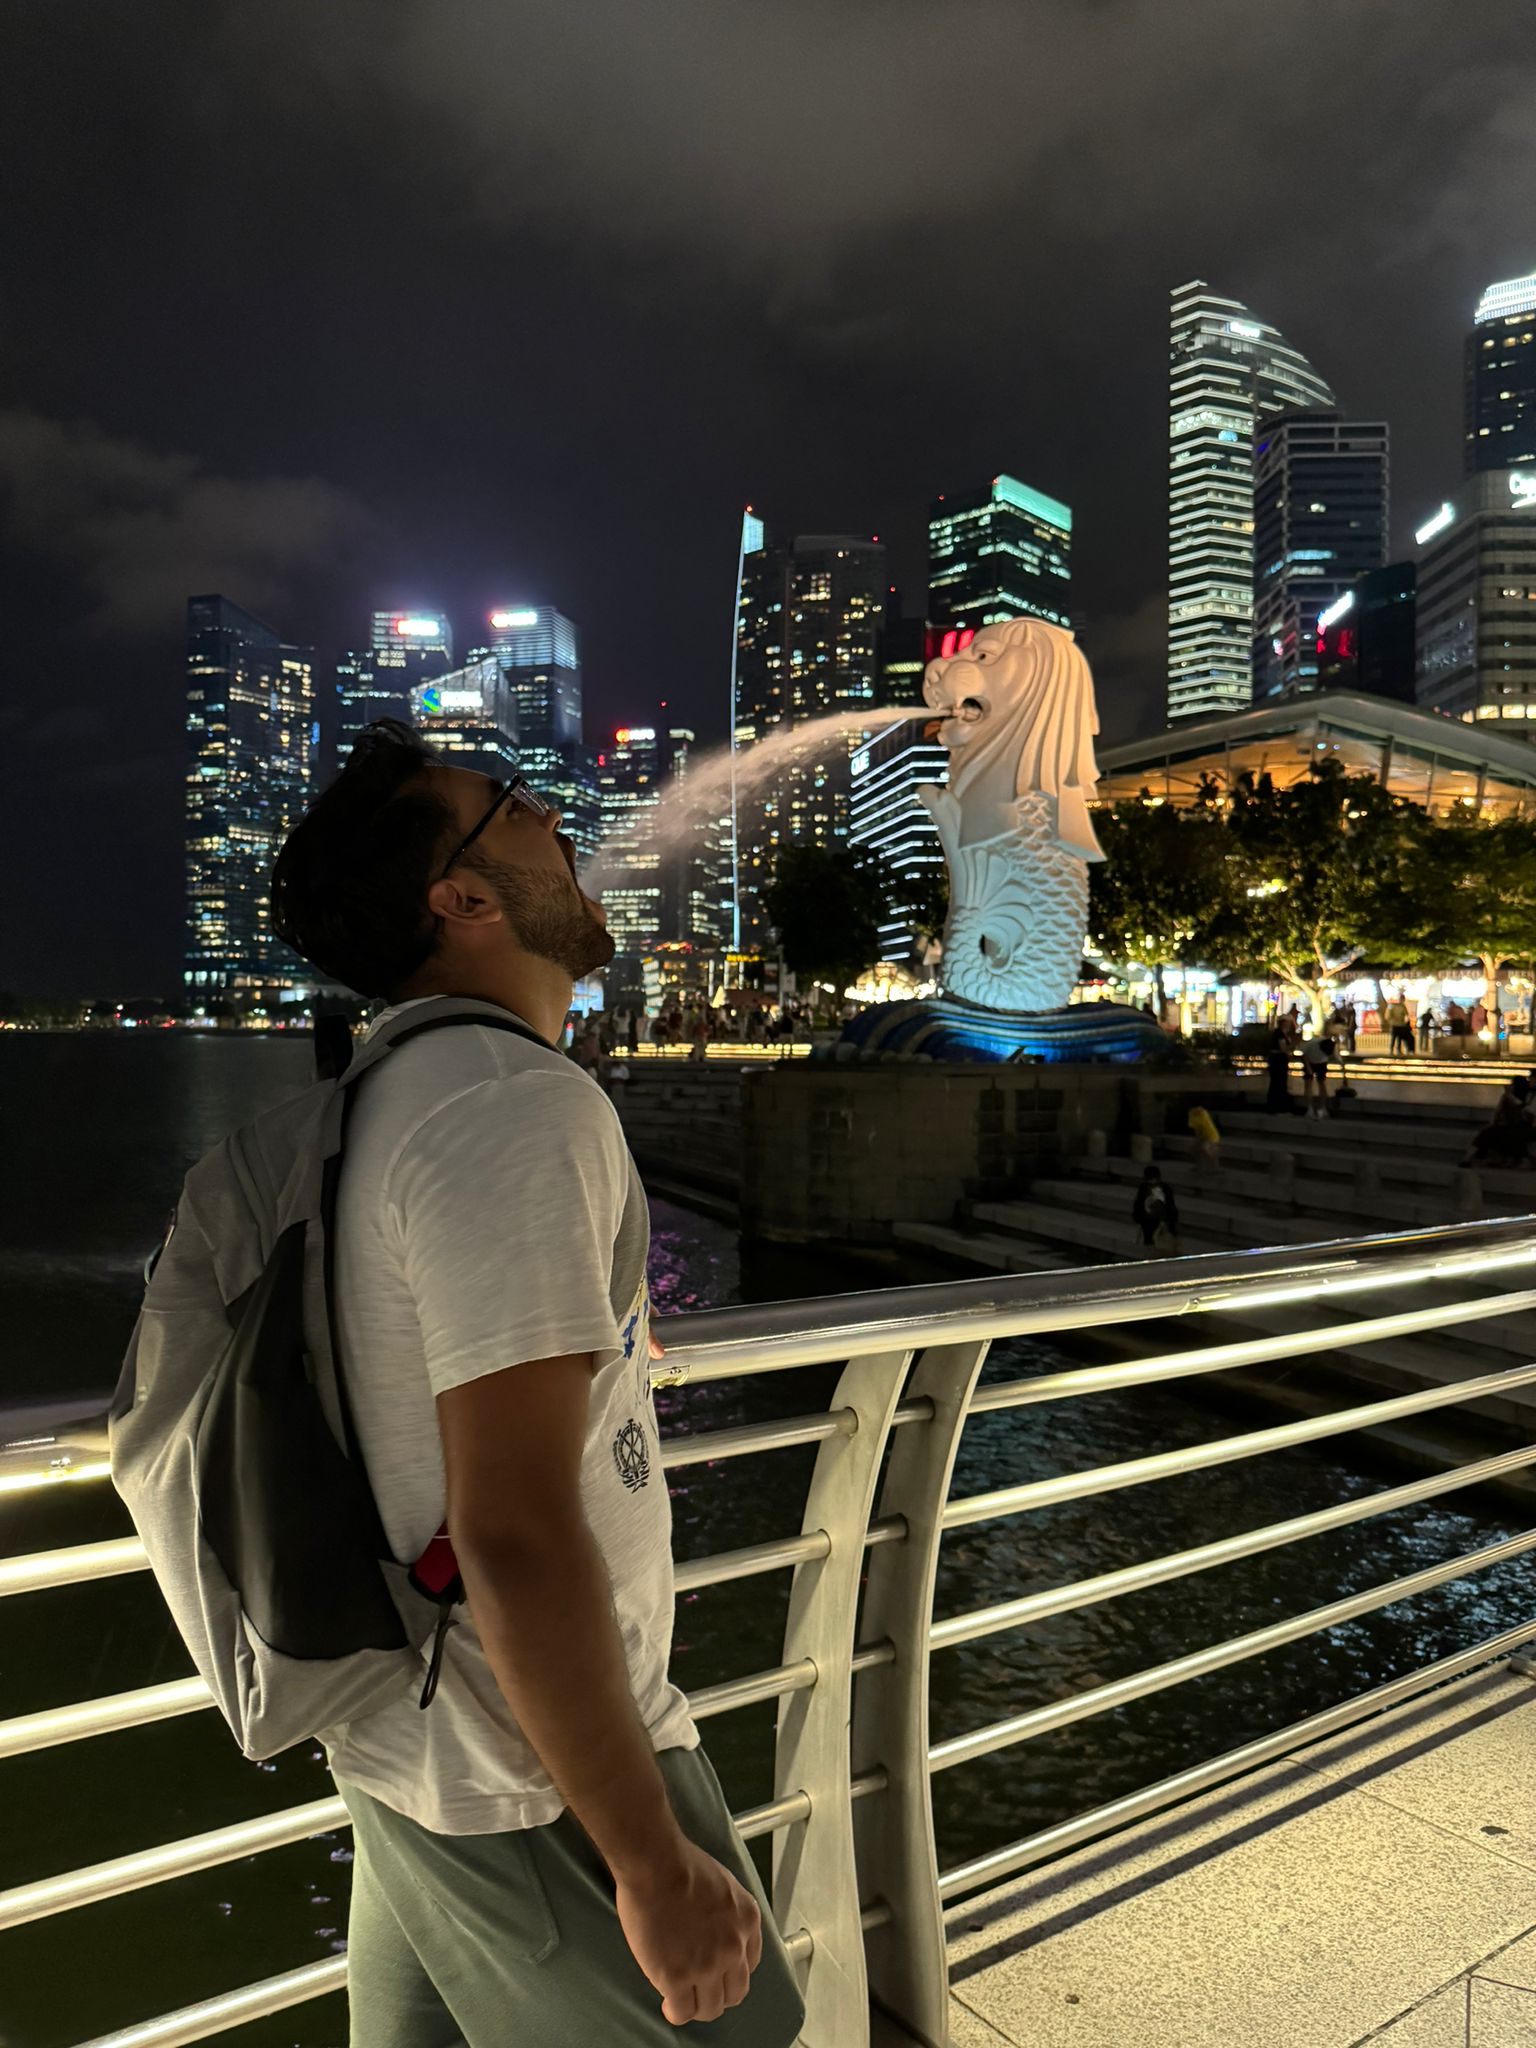 Drinking from the Merlion Statue in Singapore